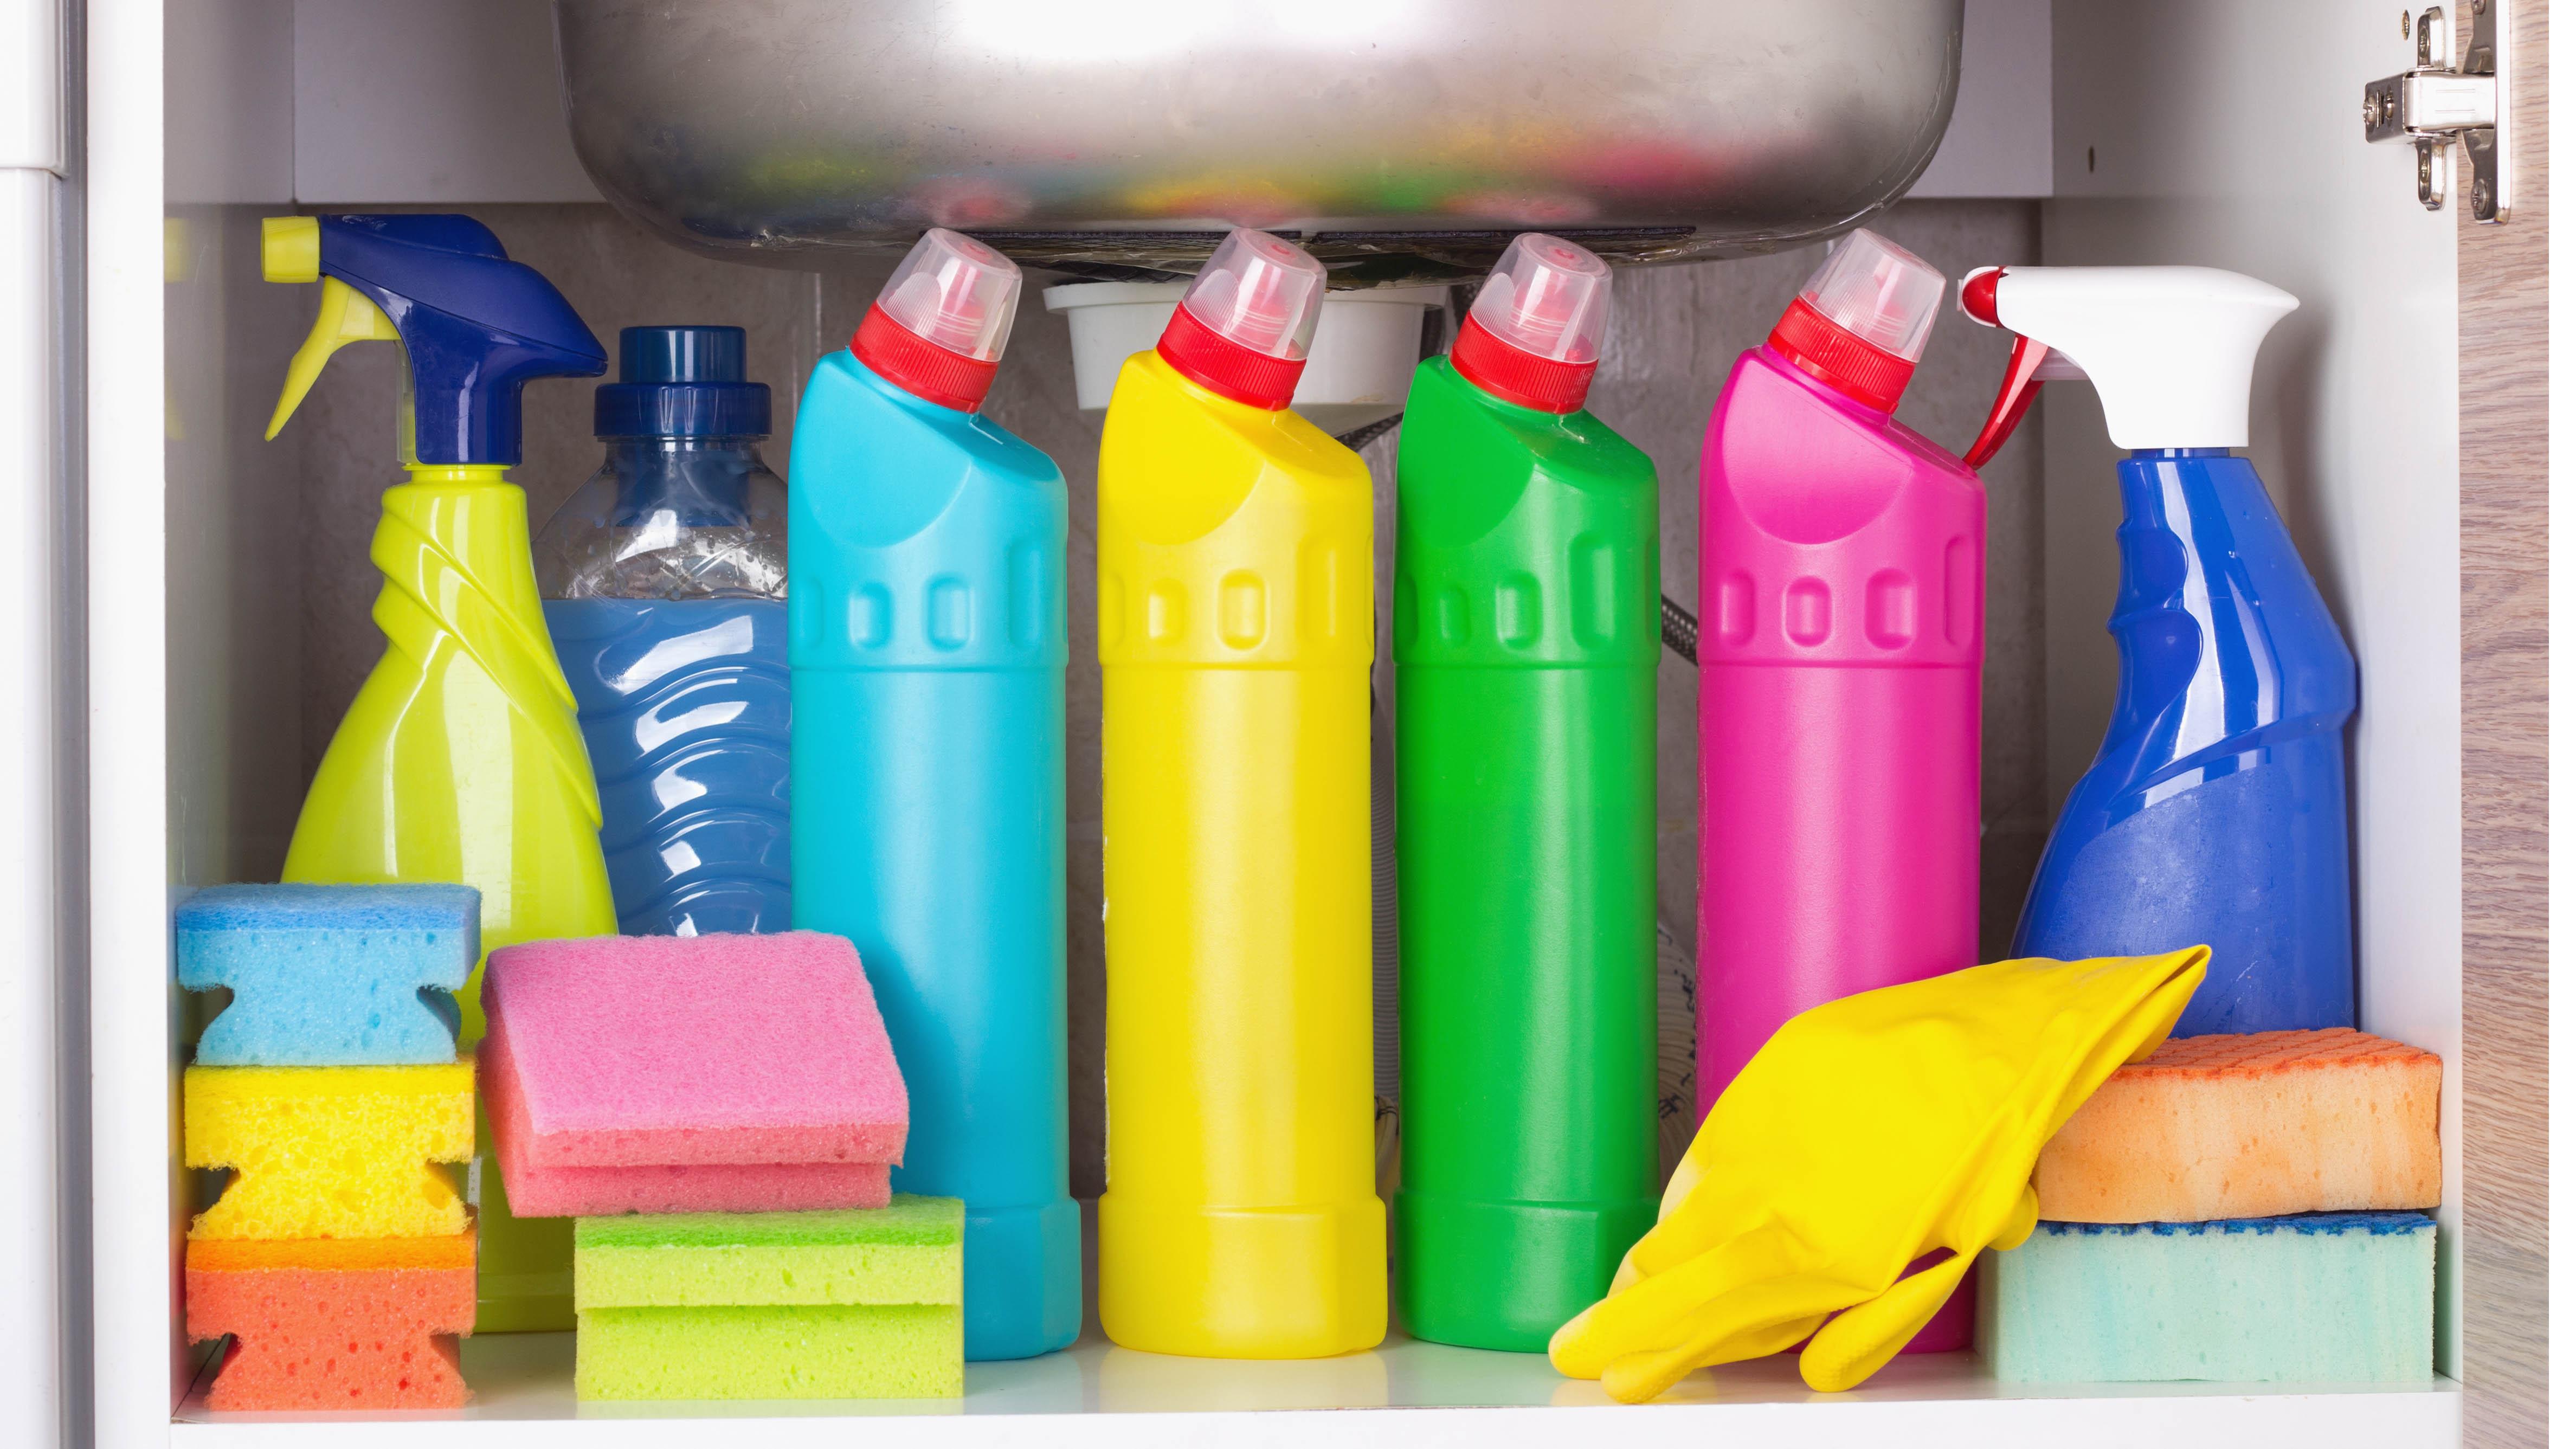 Cleaners stored under a kitchen sink